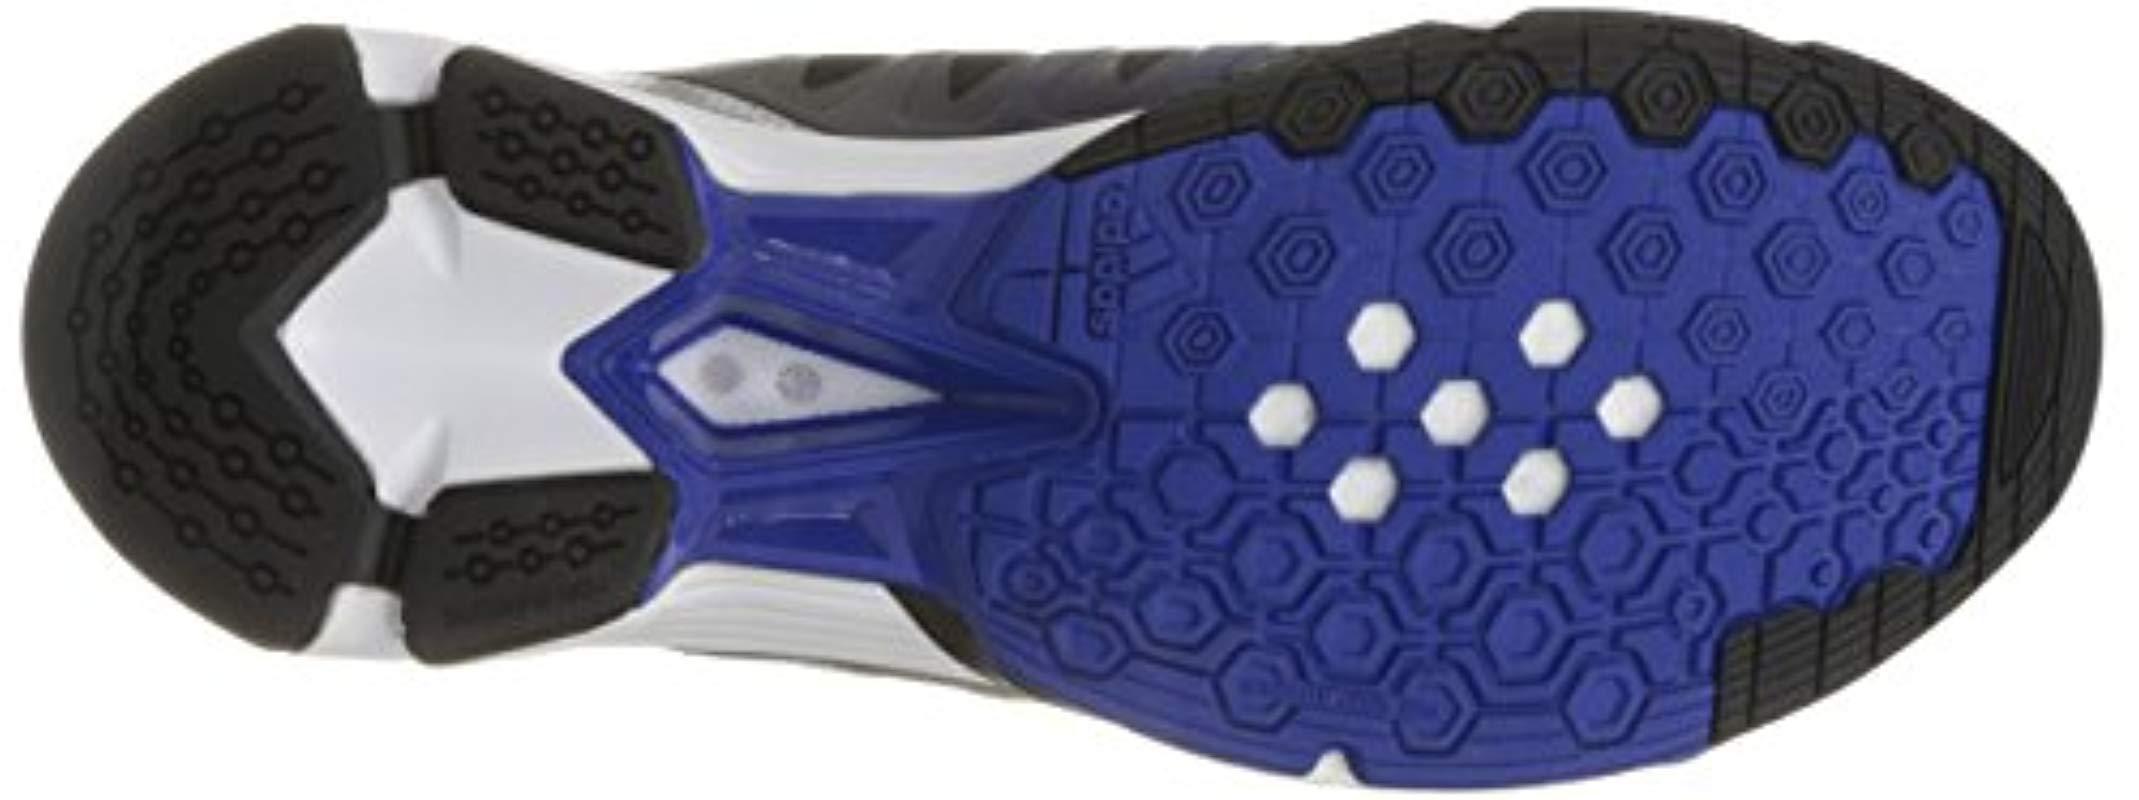 adidas Synthetic Volley Response 2 Boost W Shoe in Dark Blue/White/Dark  Blue (Blue) - Save 29% - Lyst